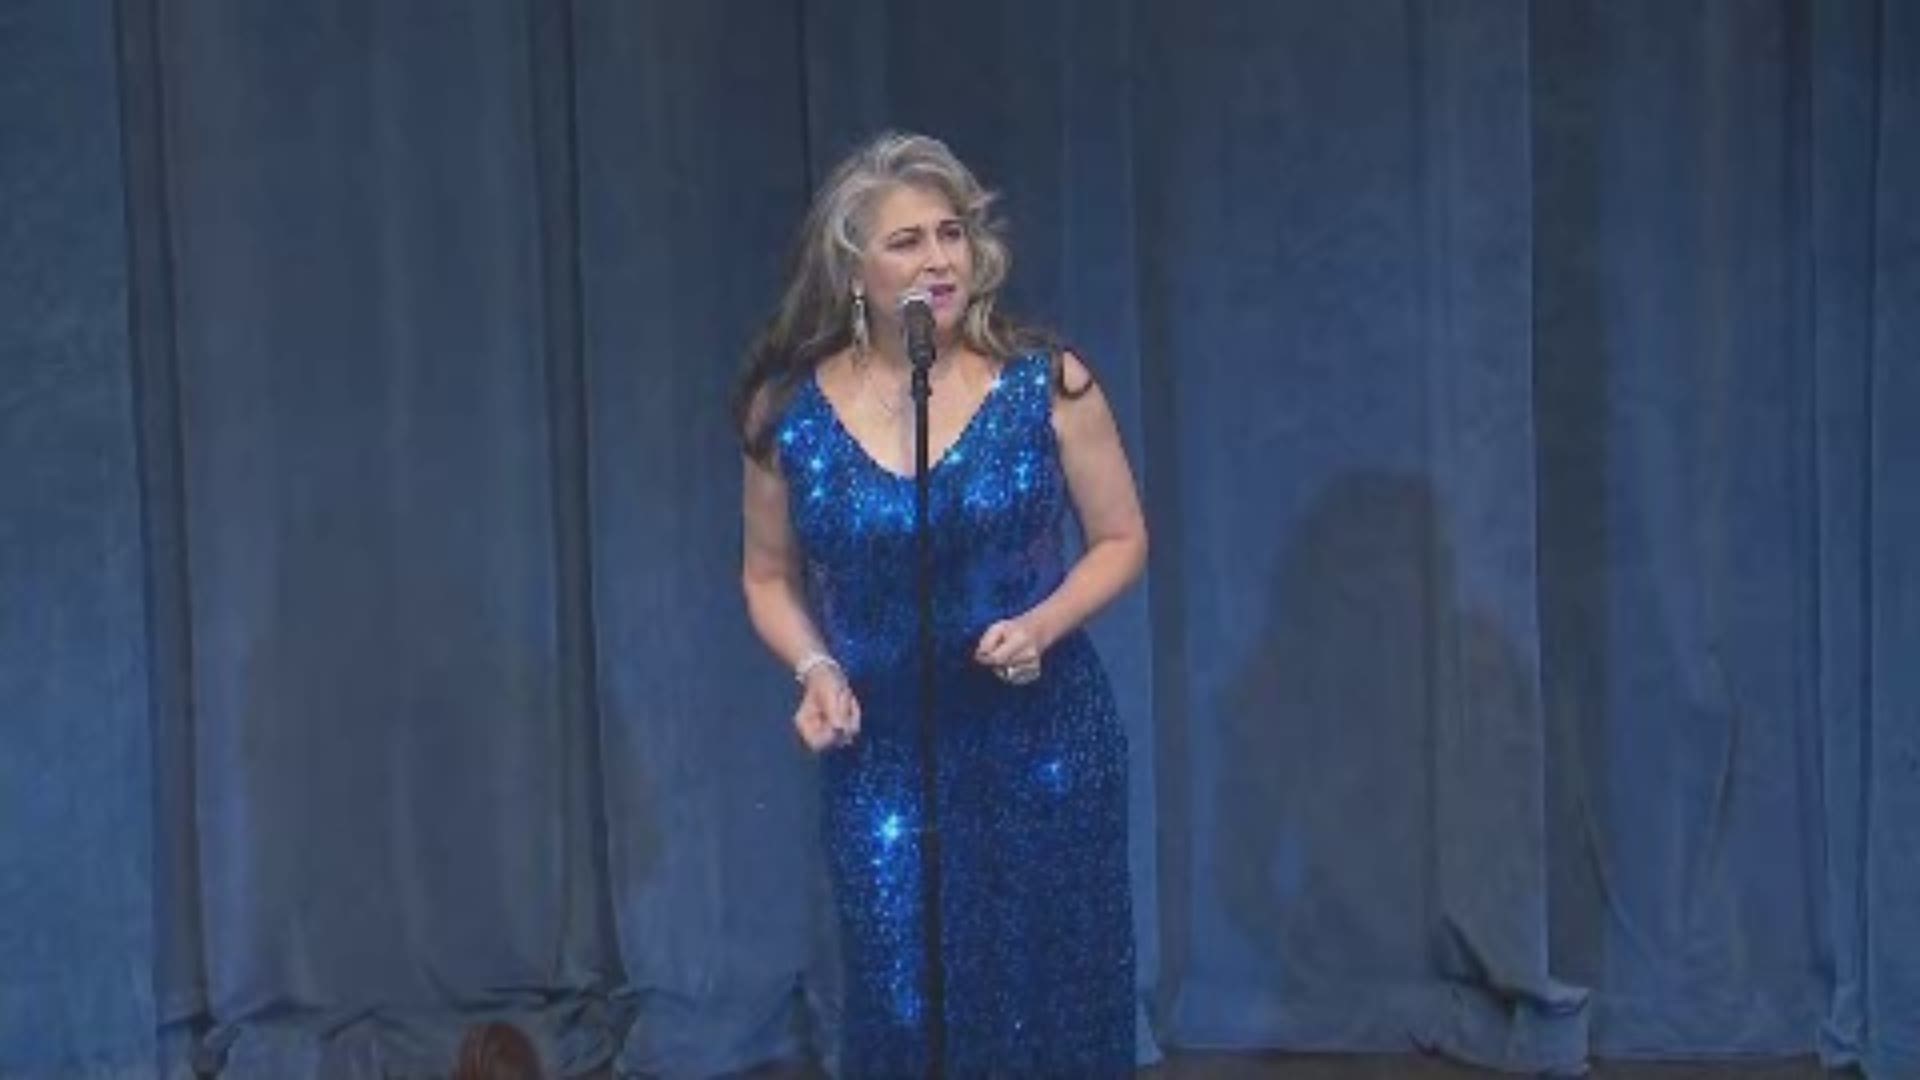 Melissa Combs, a staple in the WHAS Crusade for Children sings a medley of songs during the 65th anniversary of the telethon.